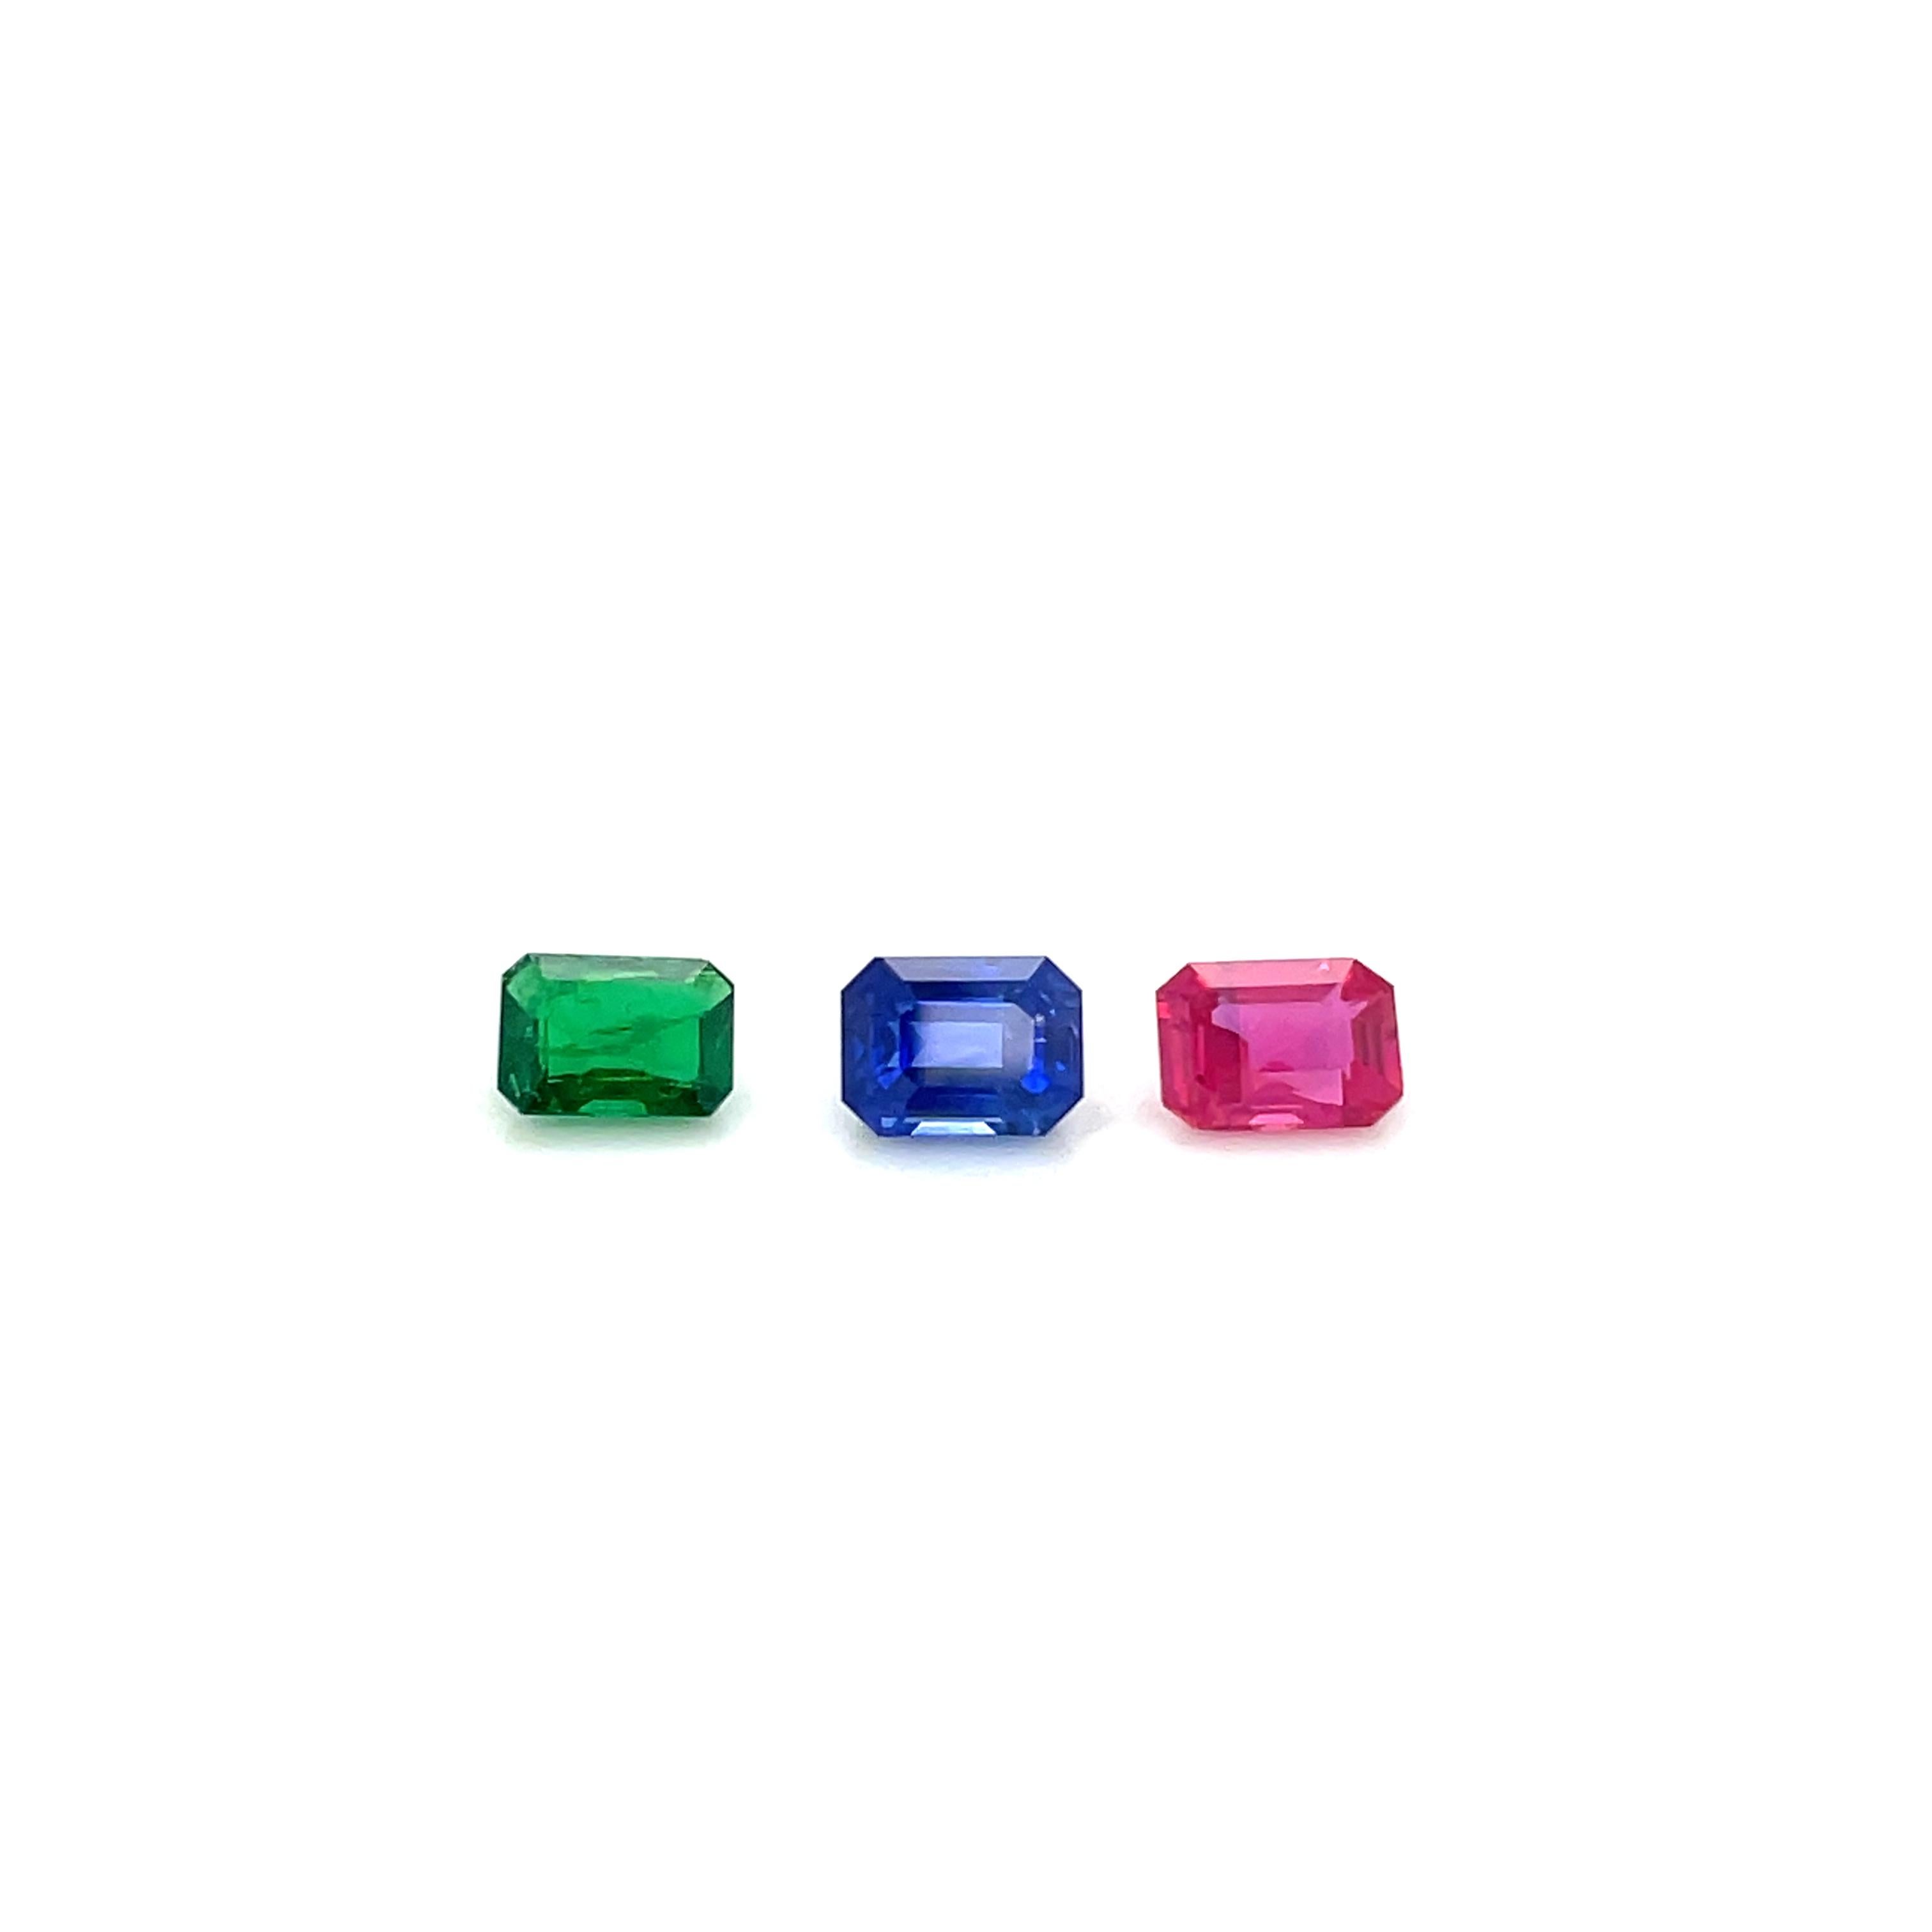 Emerald-Cut Ruby Cts 1.31 and Blue Sapphire Cts 2.16 and Emerald Cts 0.92 Loose  In New Condition For Sale In Hong Kong, HK